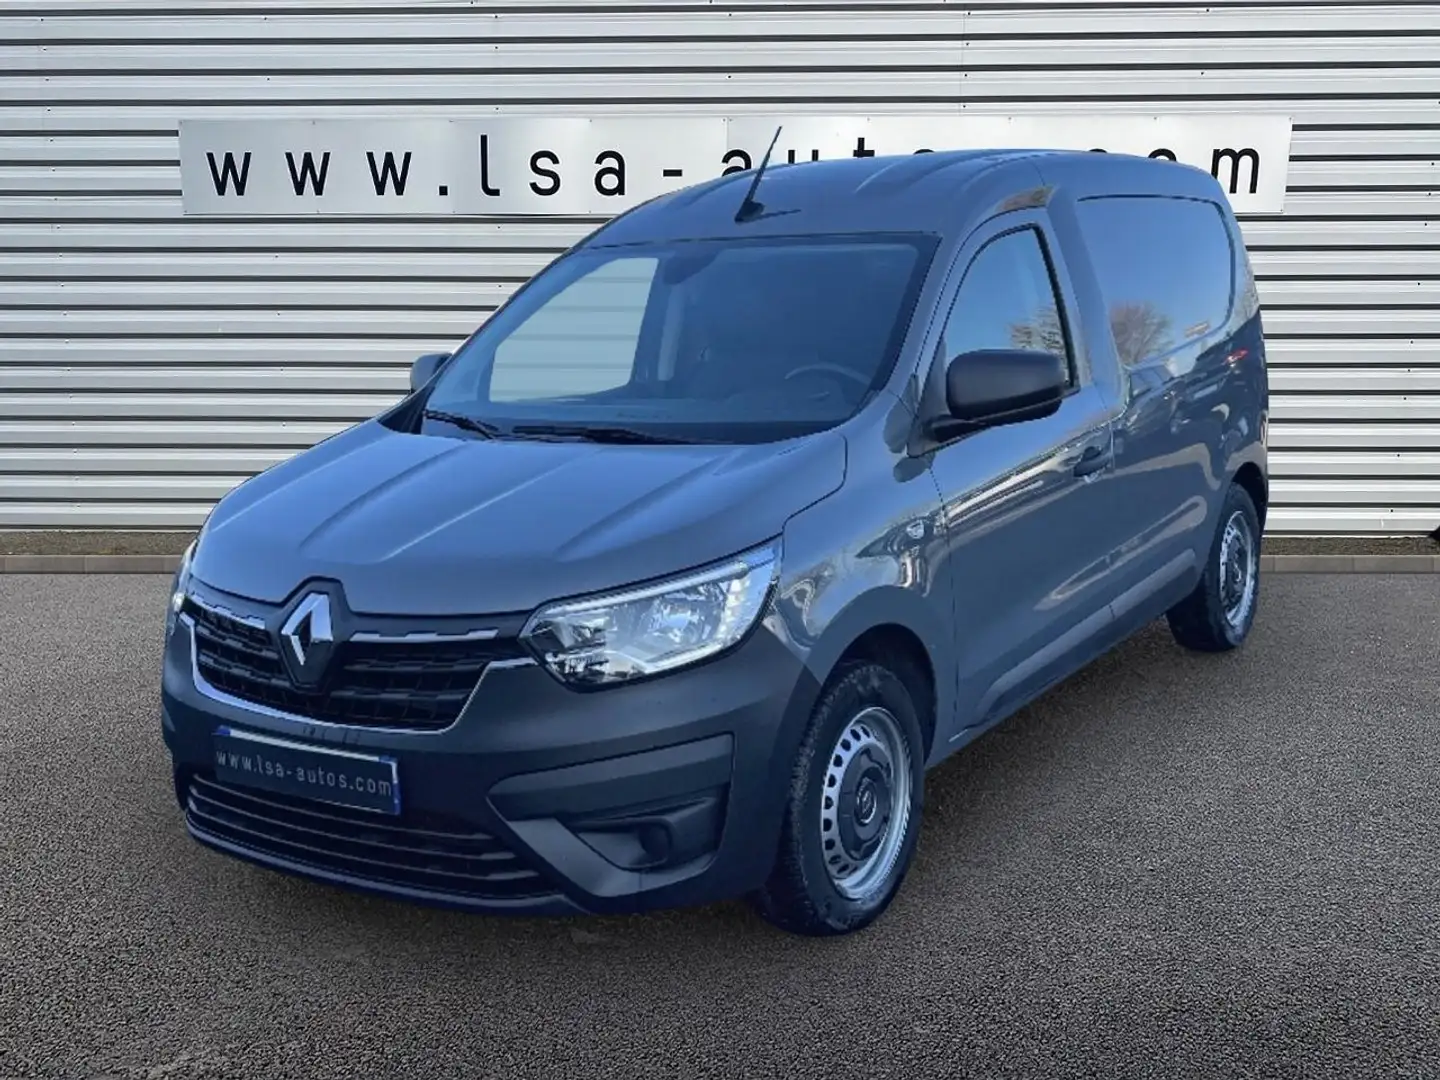 Renault Express Express 1.5 Blue dCi 95 Confort FOURGON siva - 1